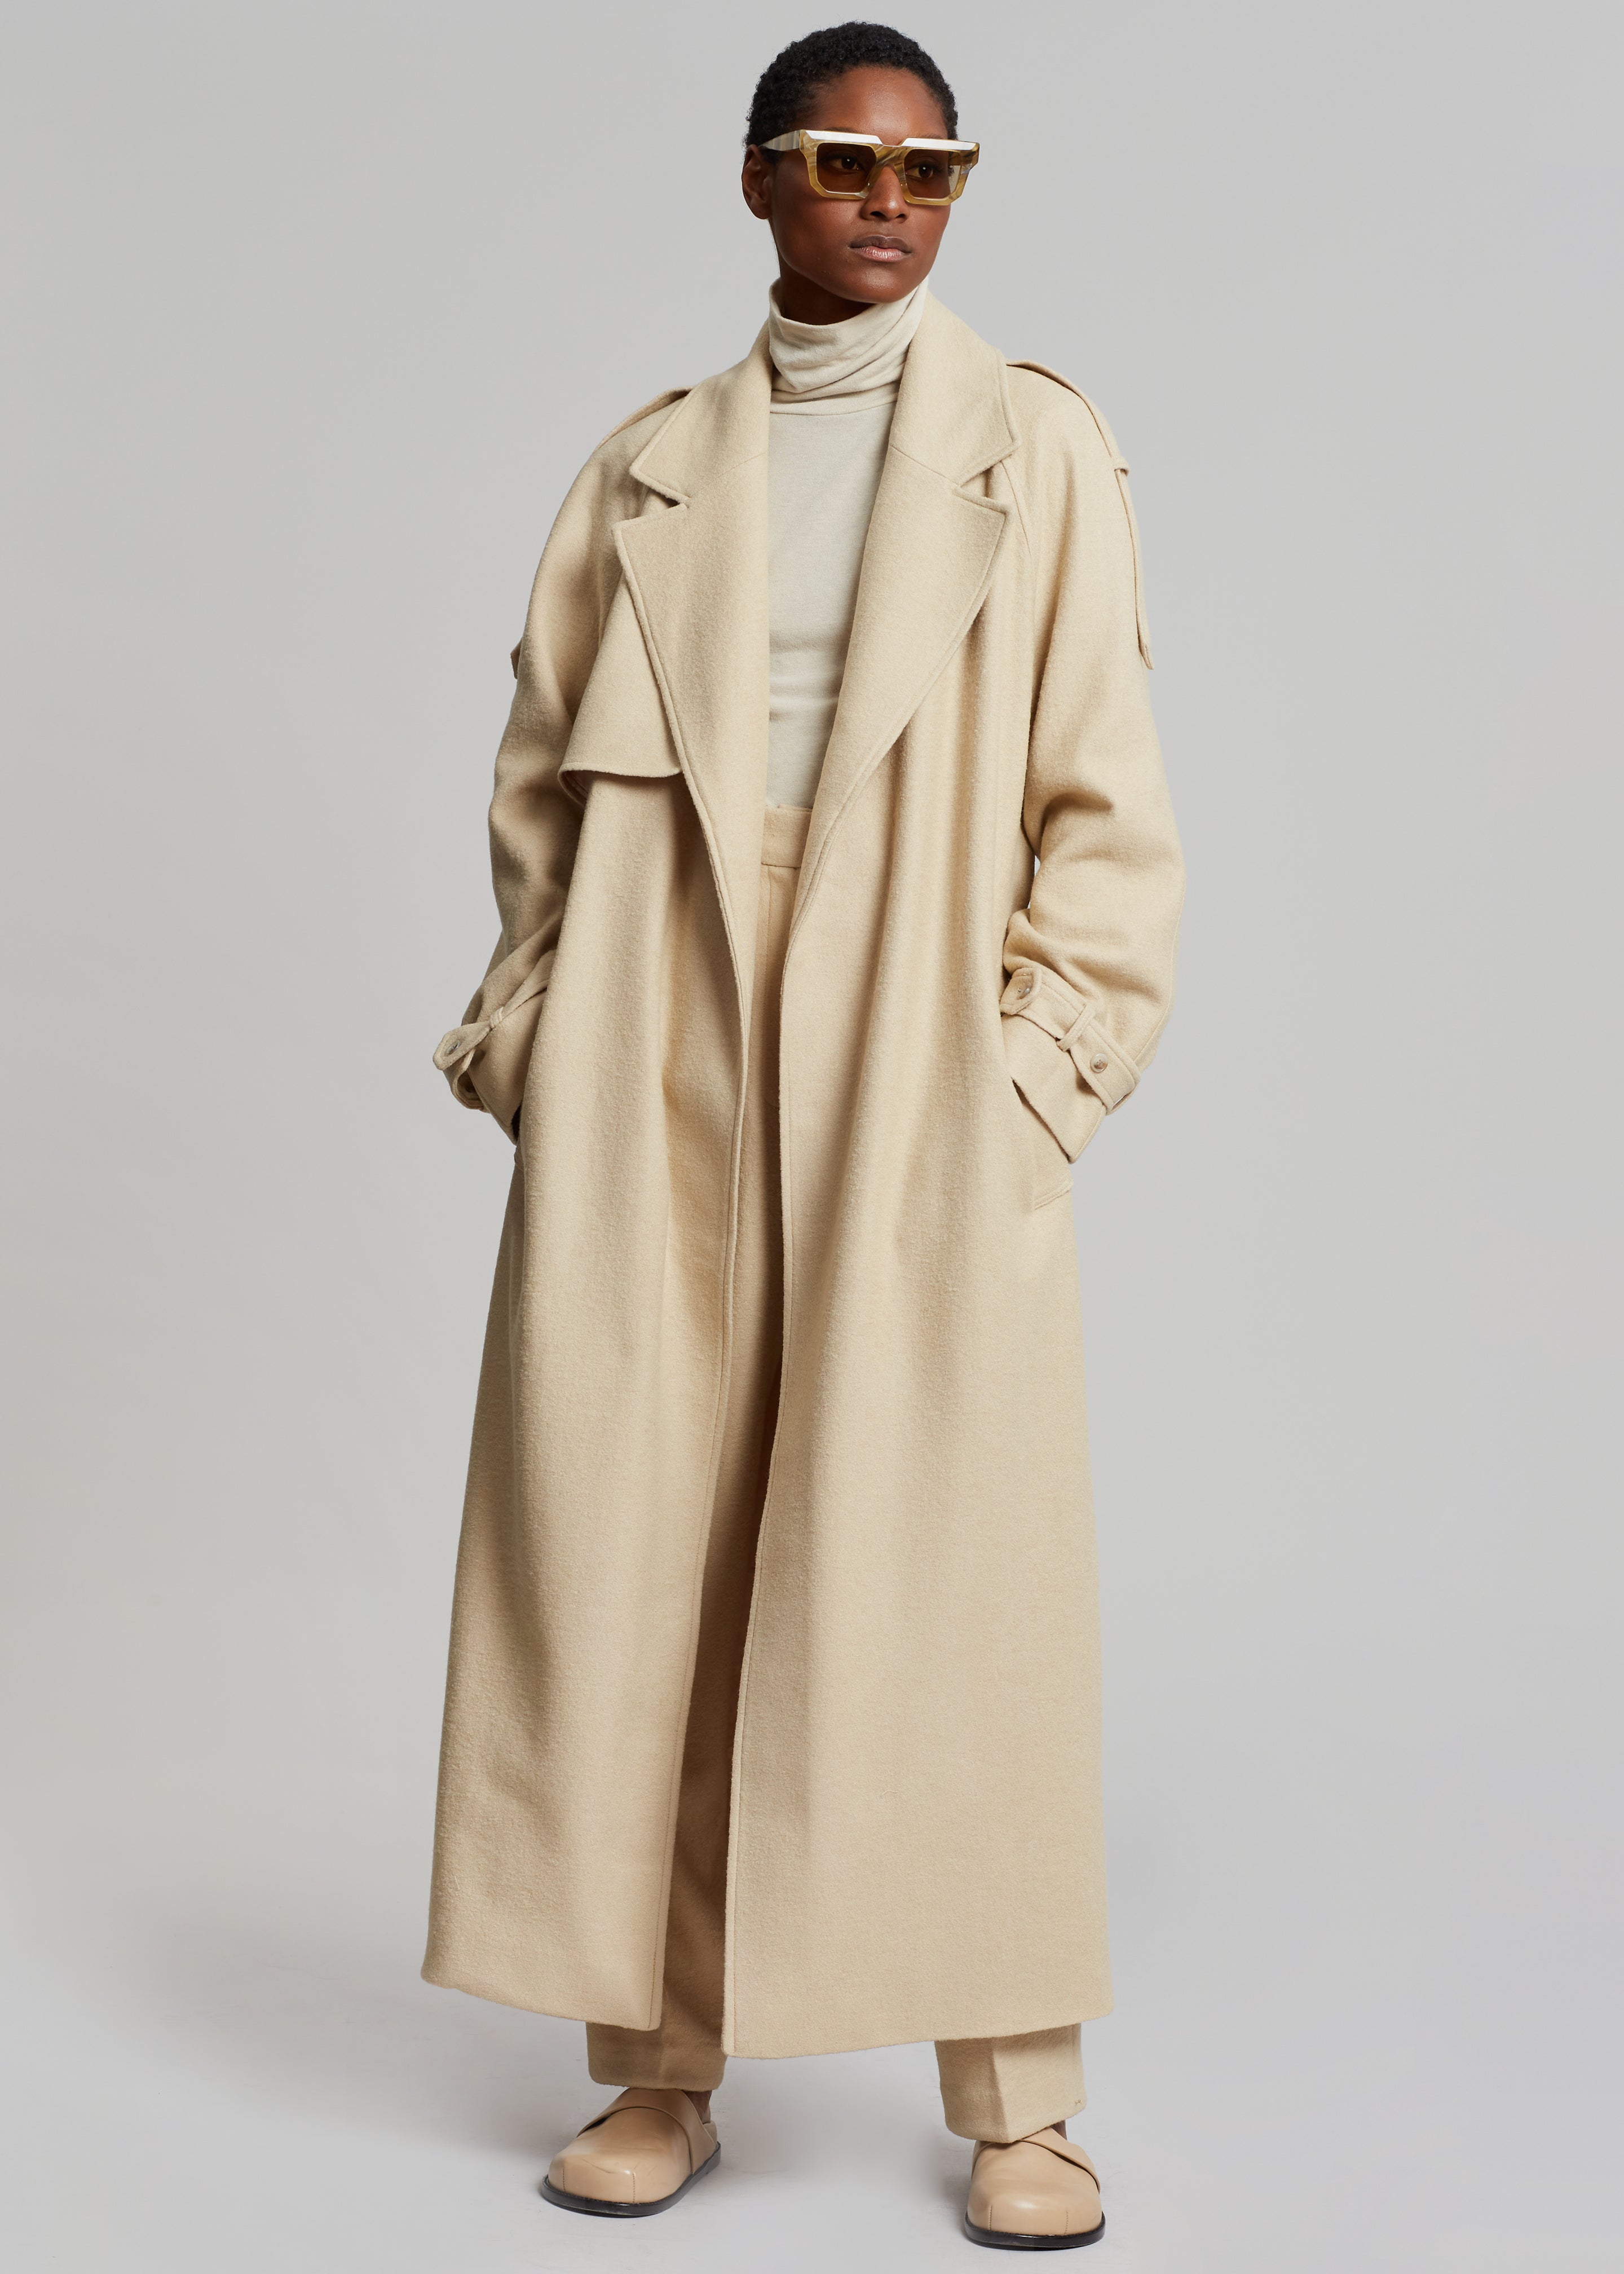 Suzanne Boiled Wool Trench Coat - Beige - 9